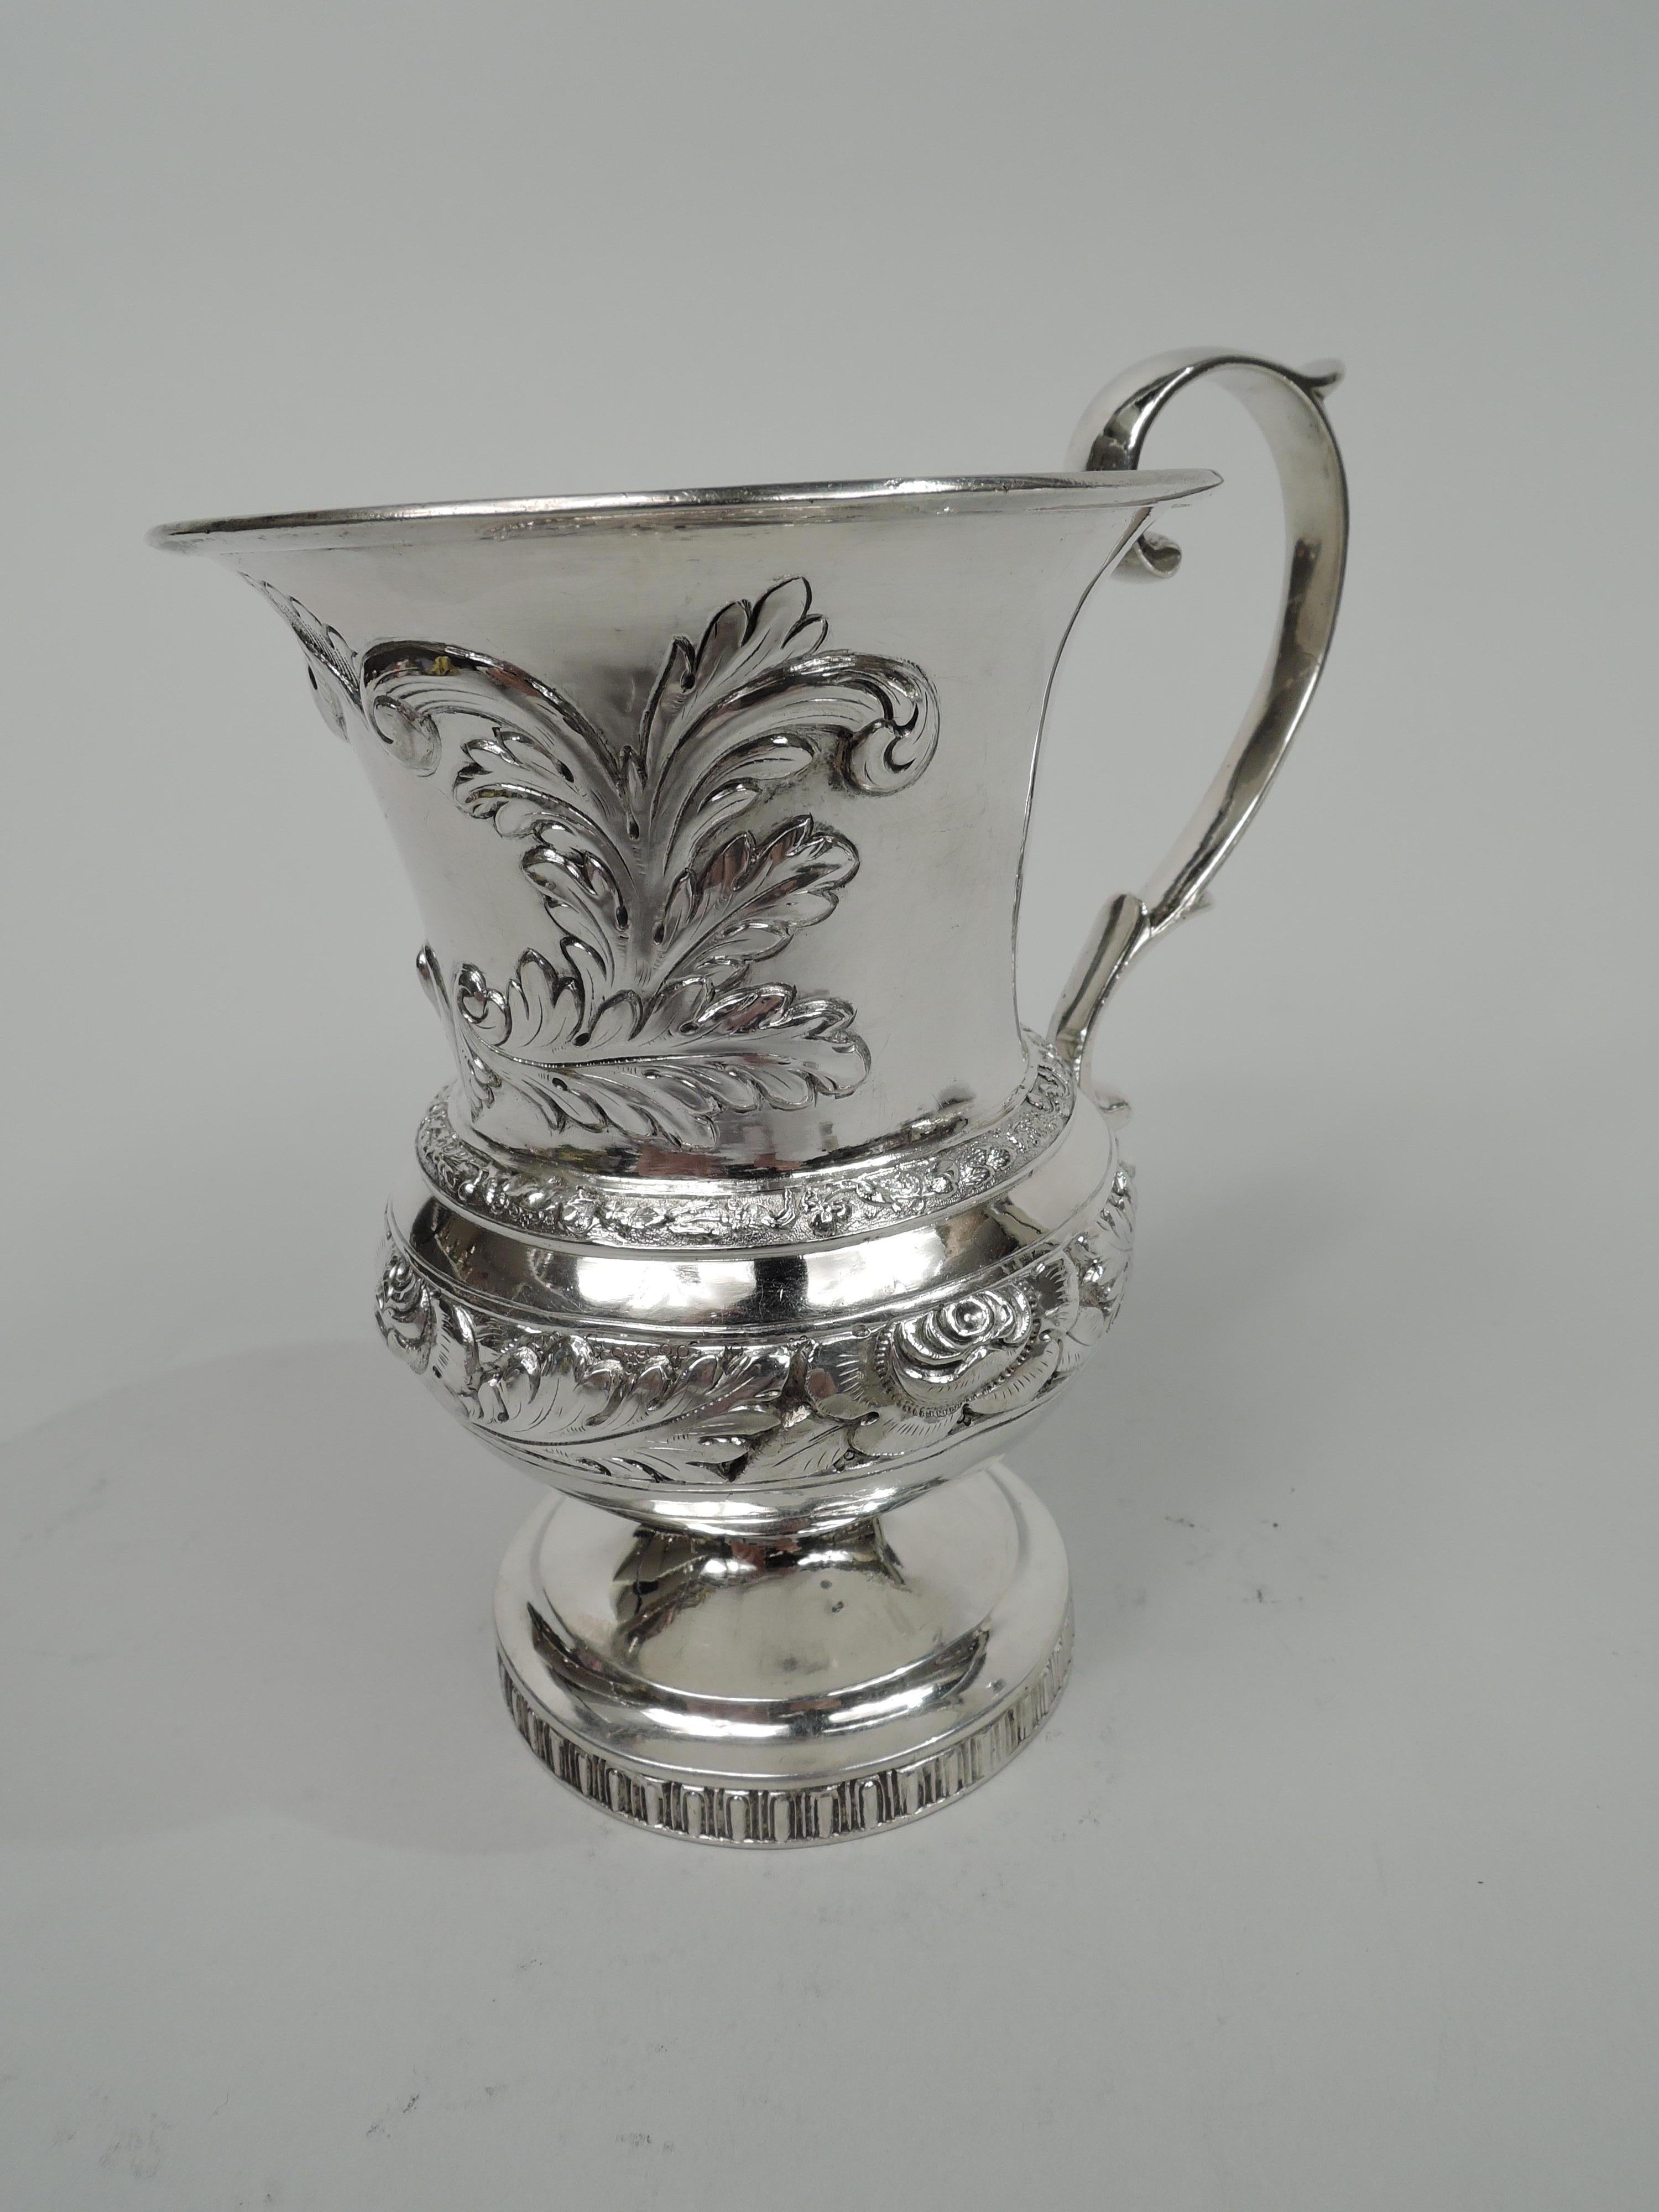 Classical coin silver baby cup. Made by Eoff & Connor, a partnership active in New York from 1833 to 1835. Bellied bowl with drum-form neck, flared rim, and capped s-scroll handle; raised and stepped foot. Shaped frame (vacant) with chased scrolling